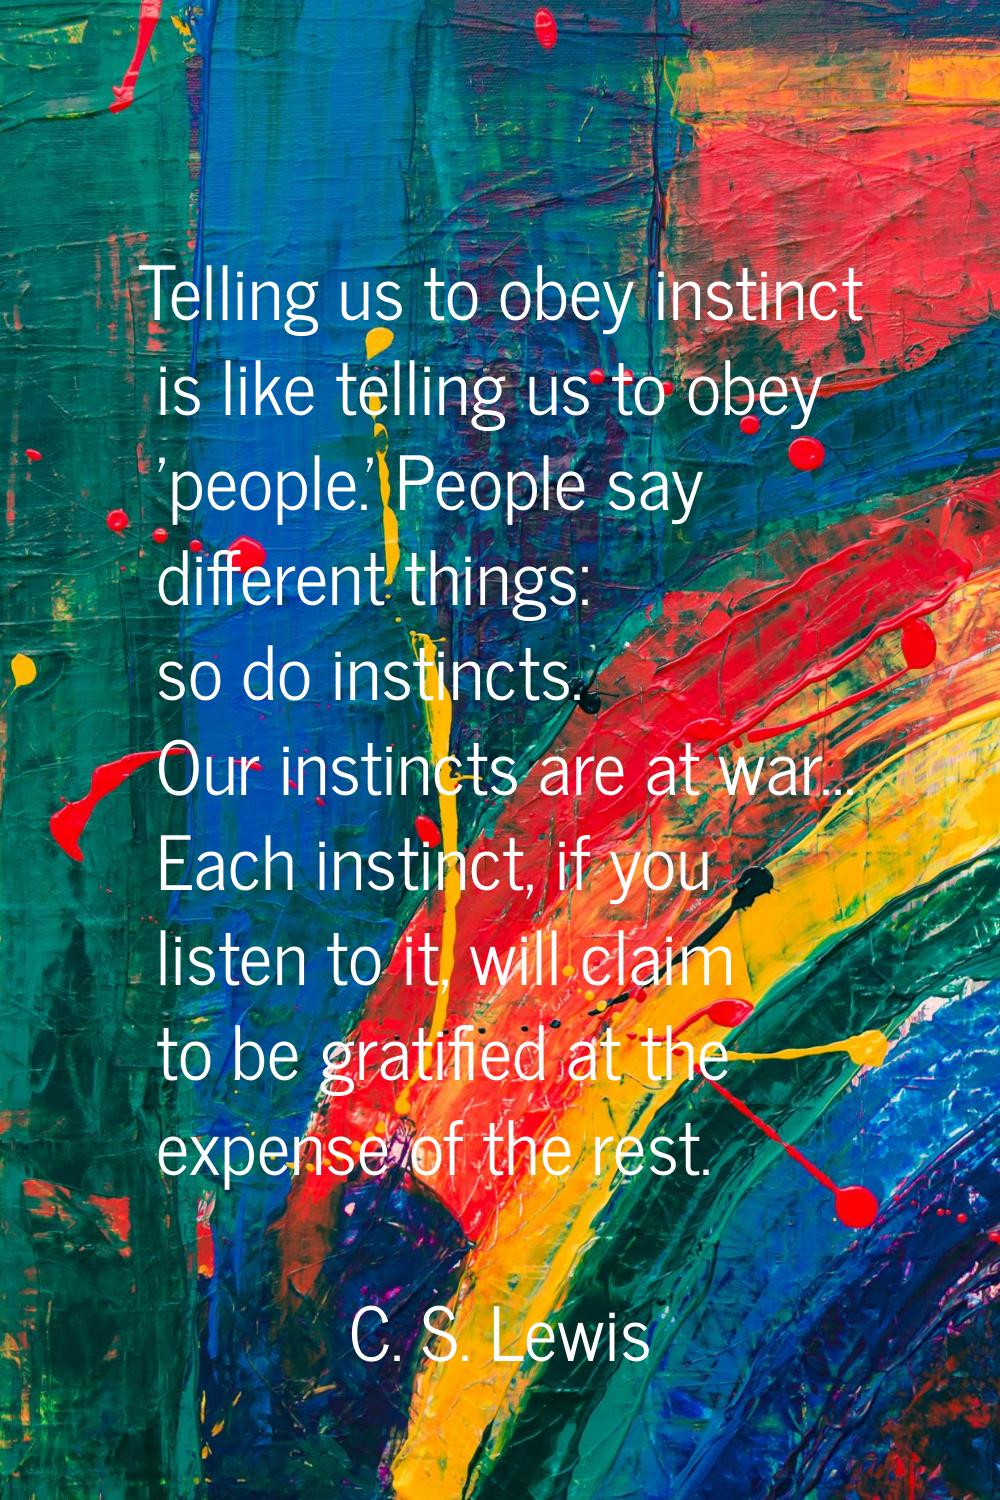 Telling us to obey instinct is like telling us to obey 'people.' People say different things: so do